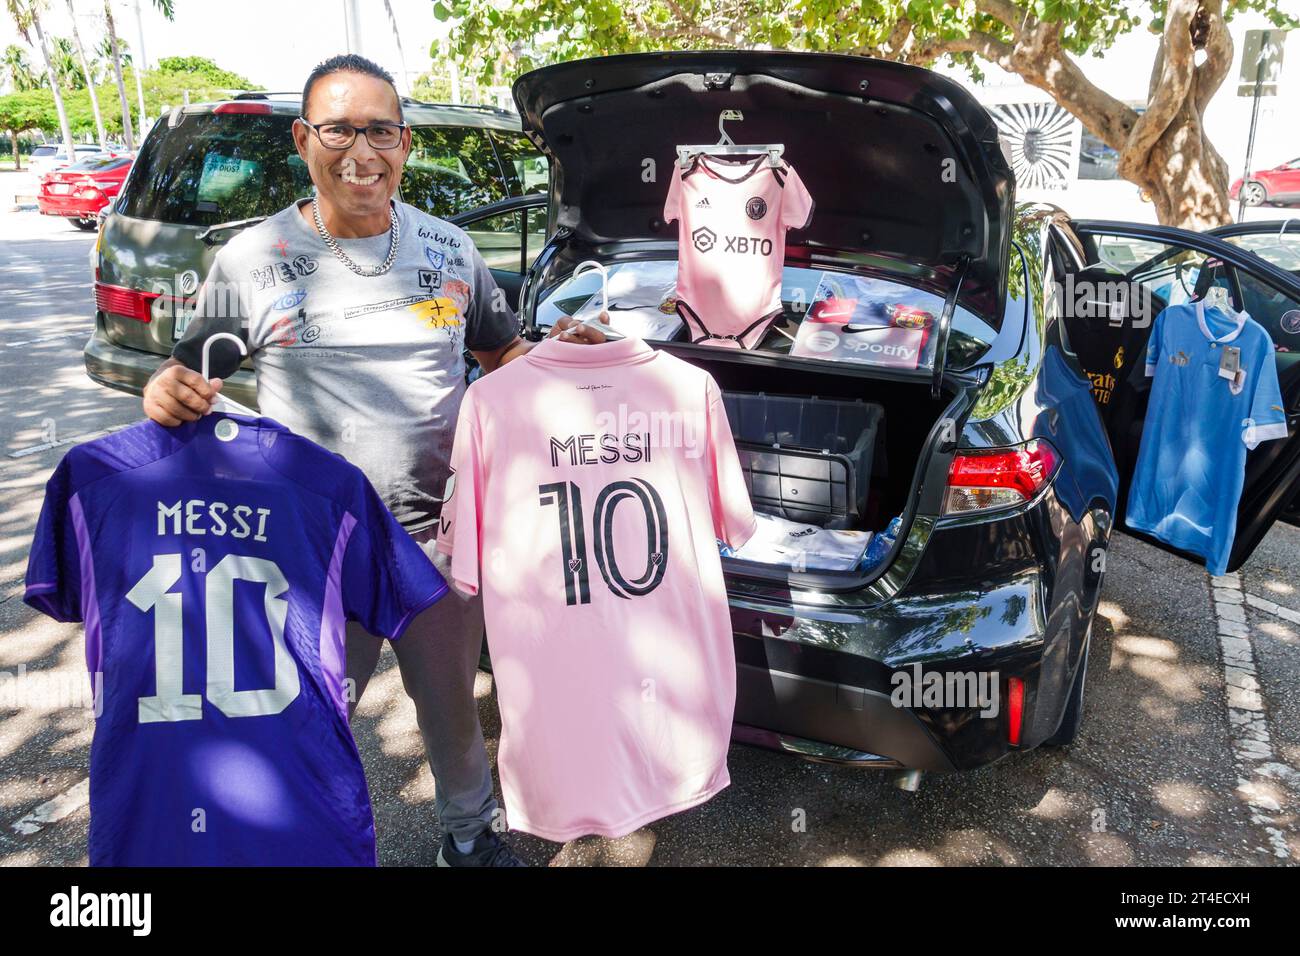 Miami Beach Florida,North Beach parking lot car park,selling Messi soccer football futbol shirts from out of car,man men male,adult,resident,street ve Stock Photo